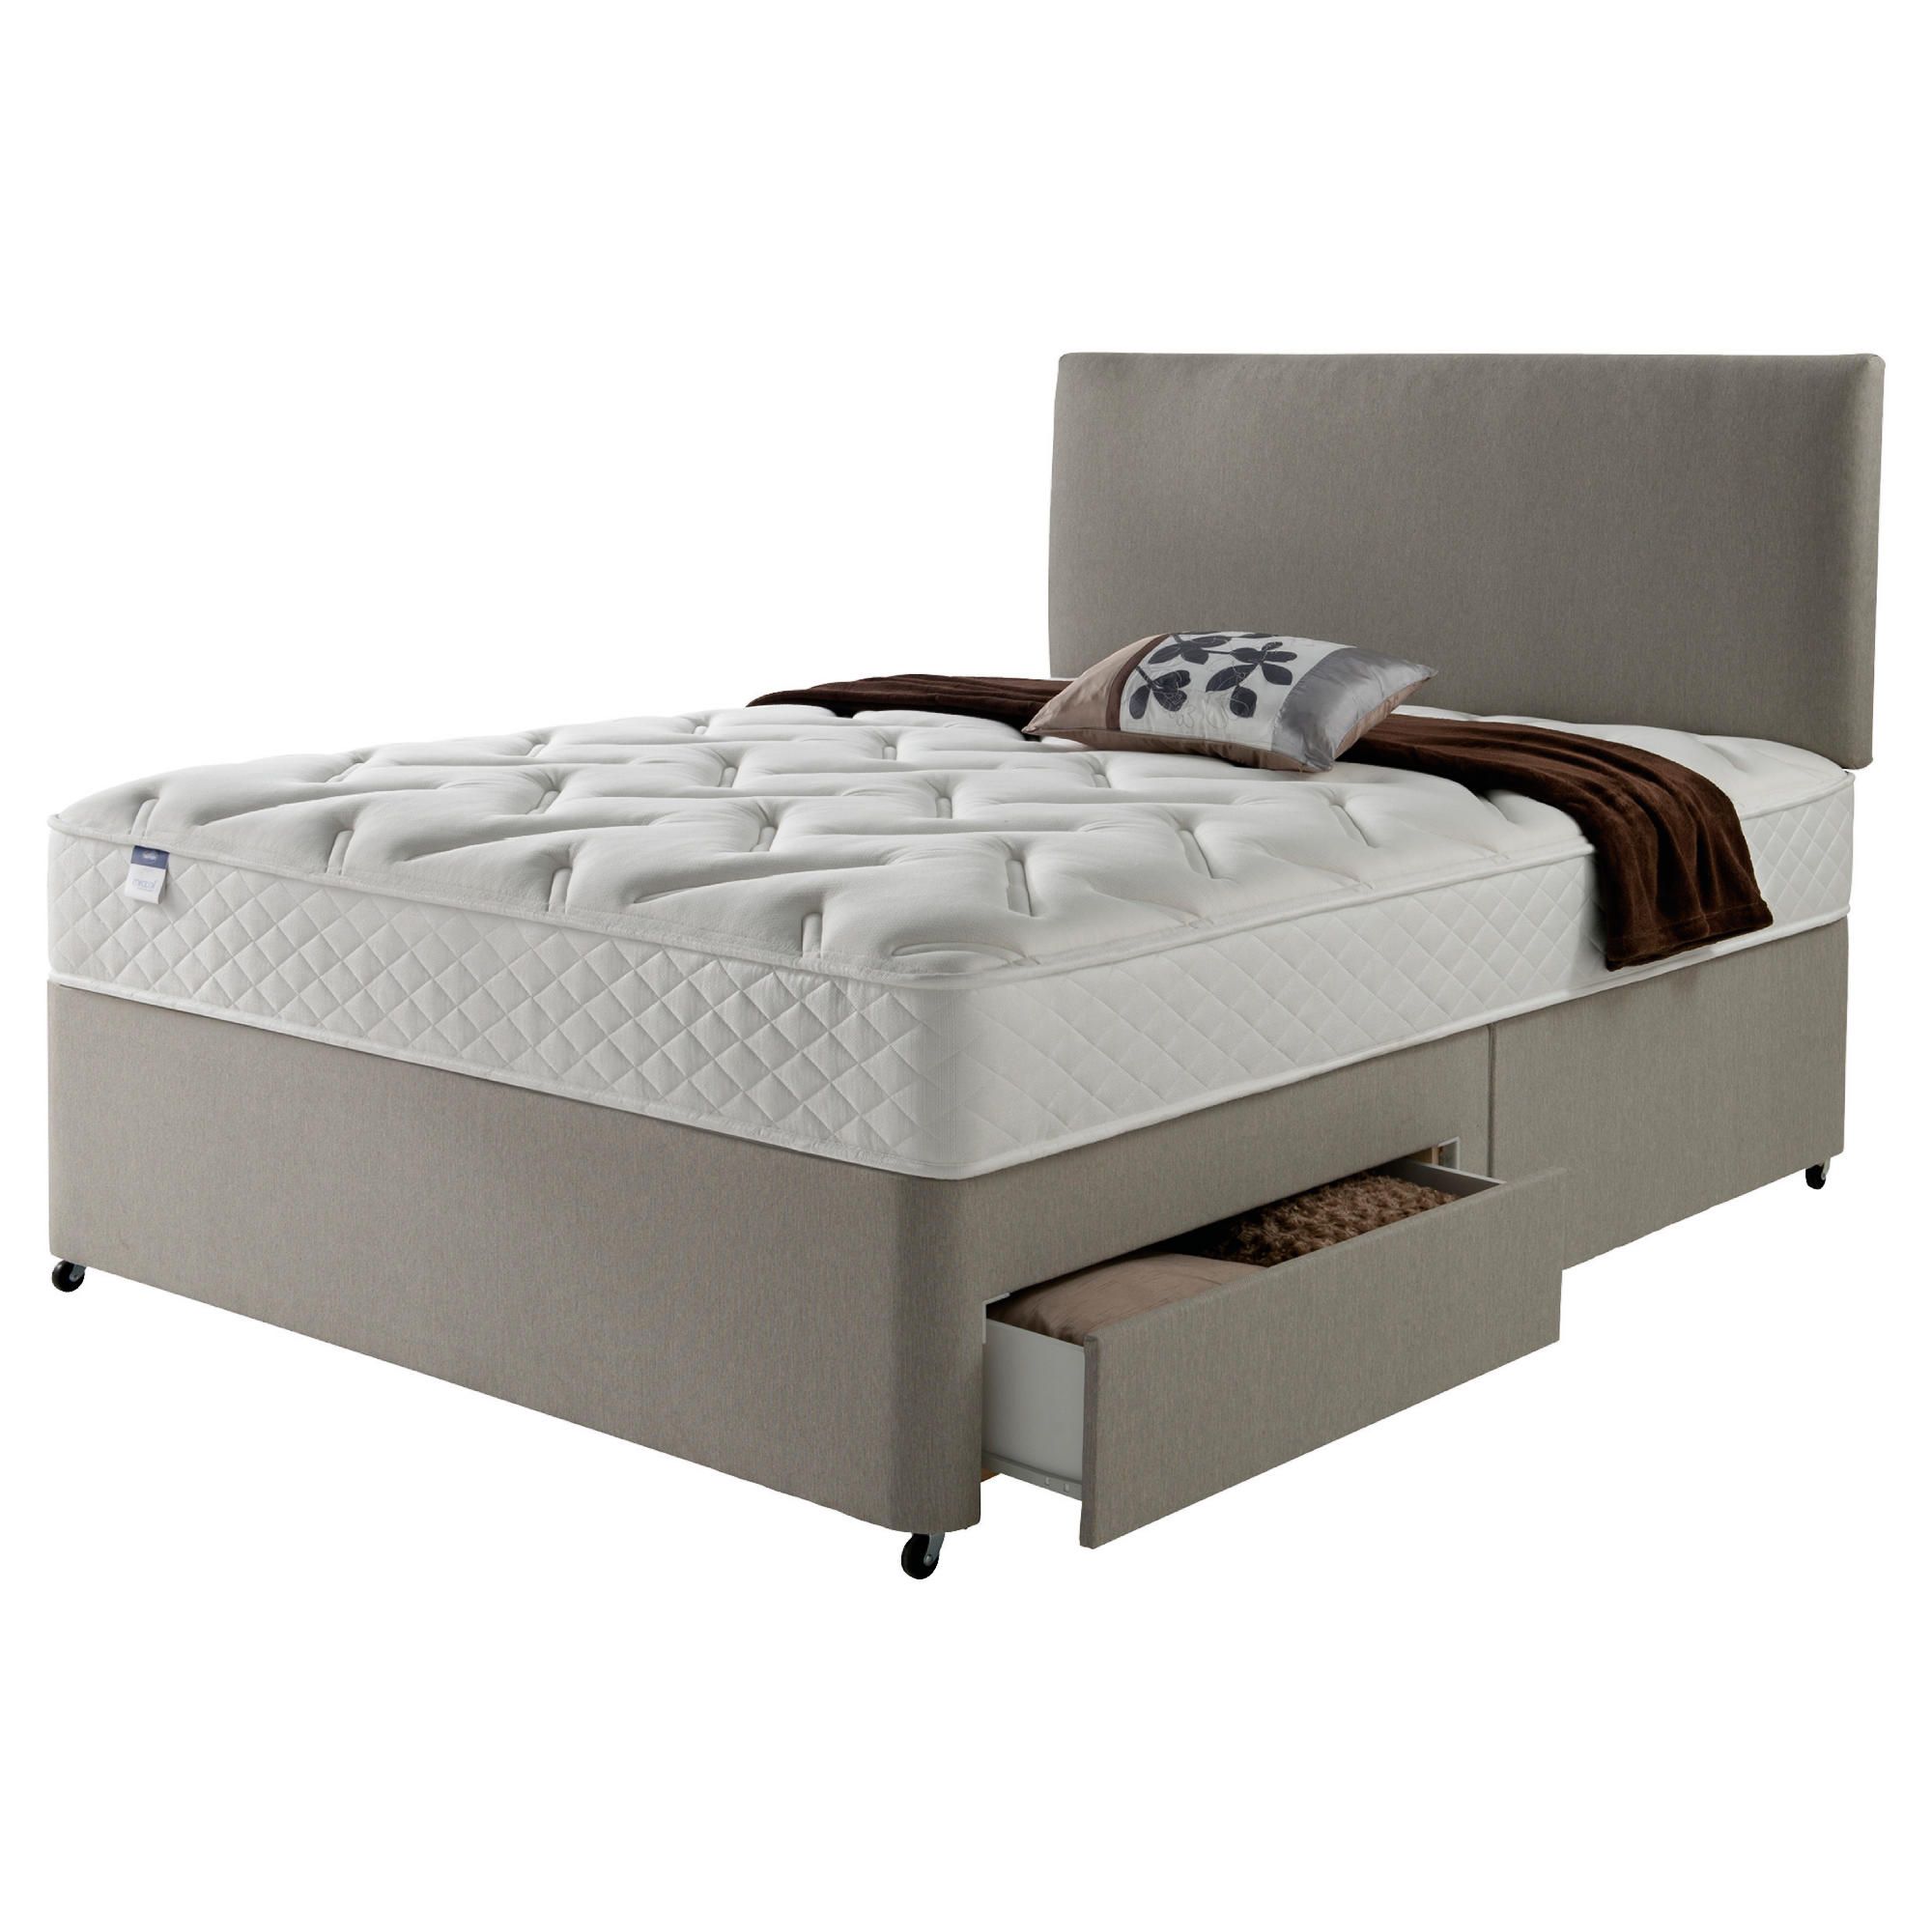 Silentnight Miracoil Luxury Memory 4 Drawer King Size Divan Mink with Headboard at Tesco Direct